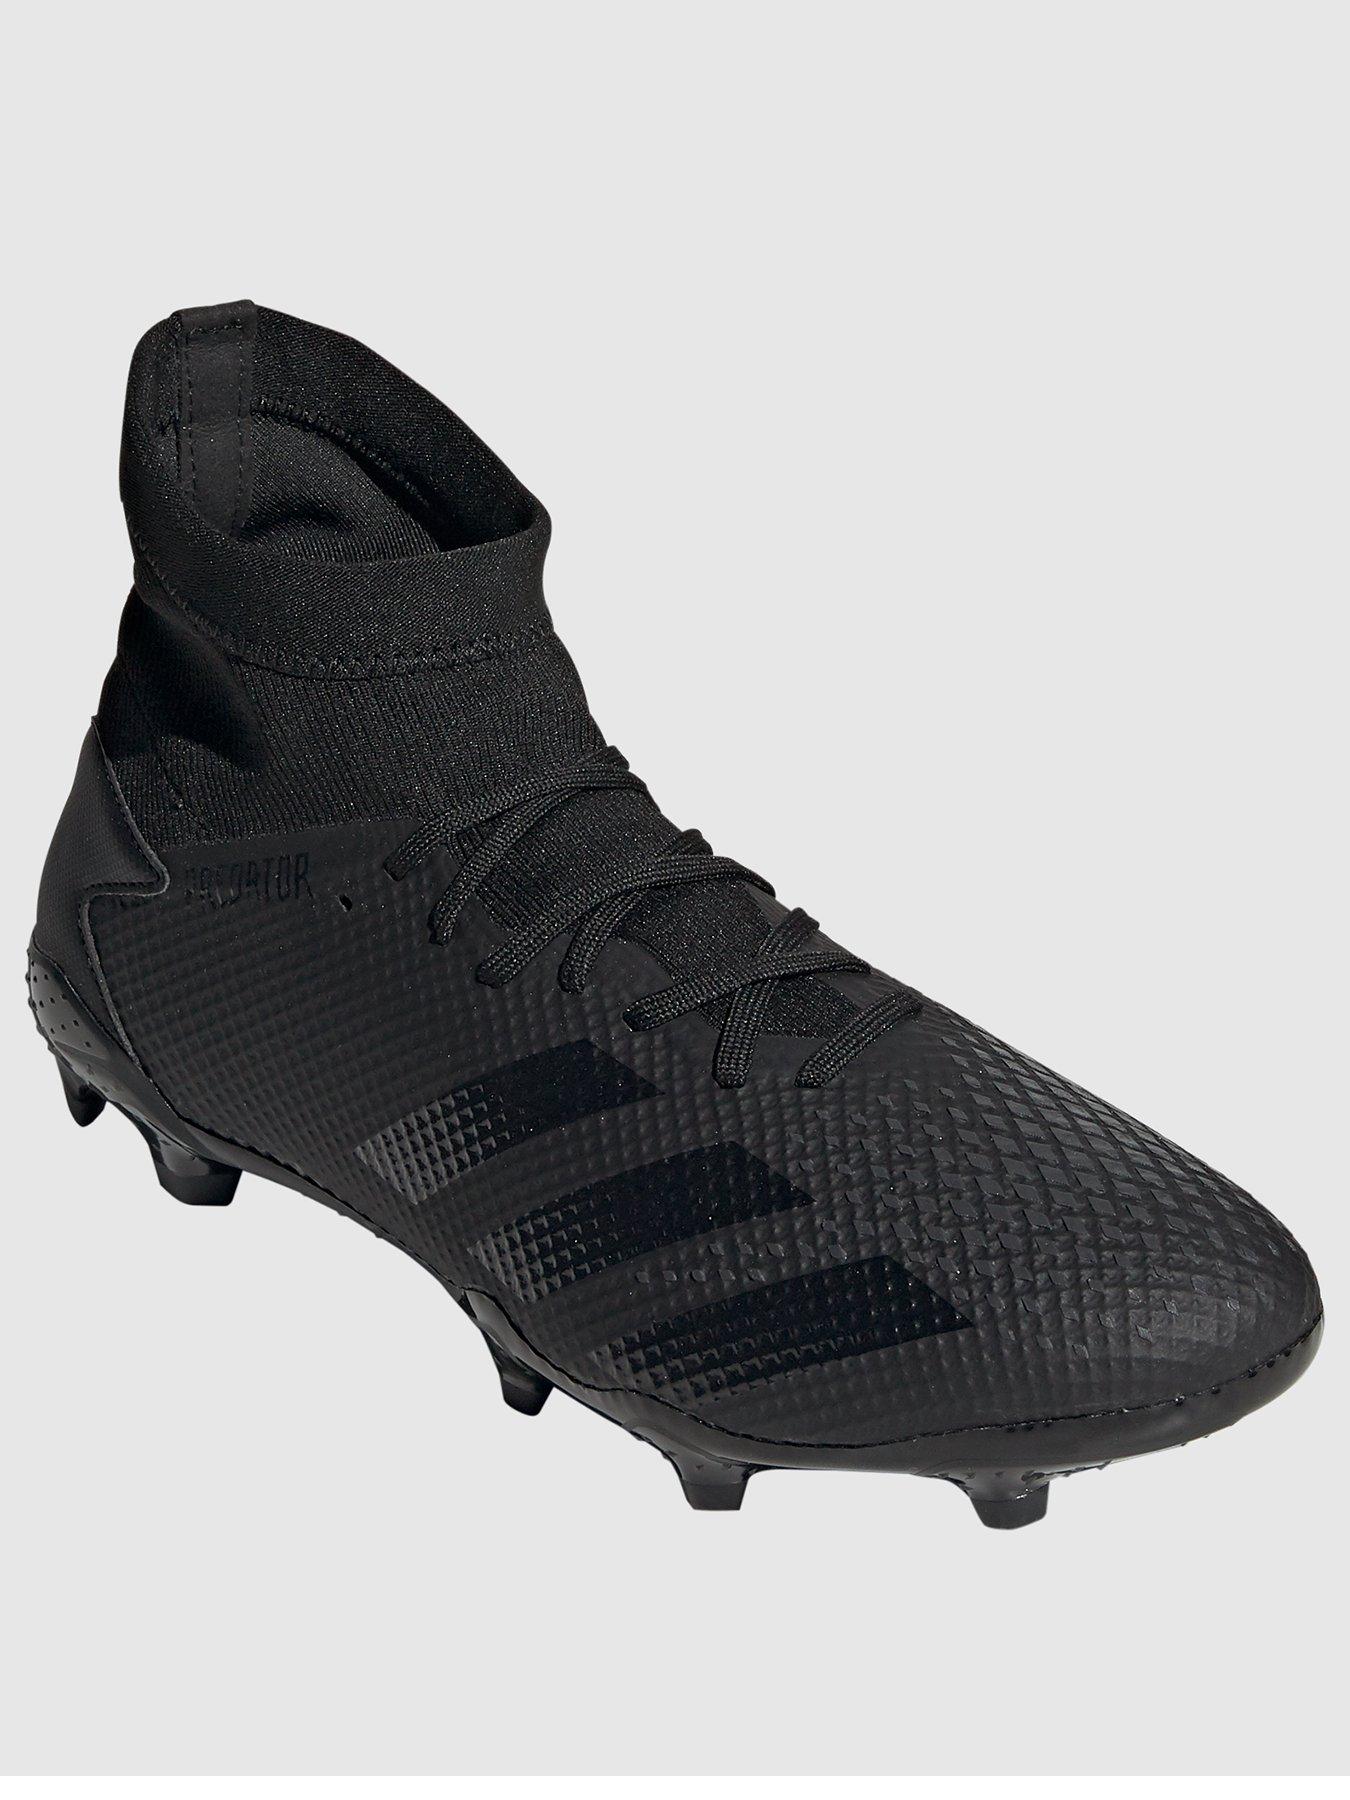 astro football boots sports direct